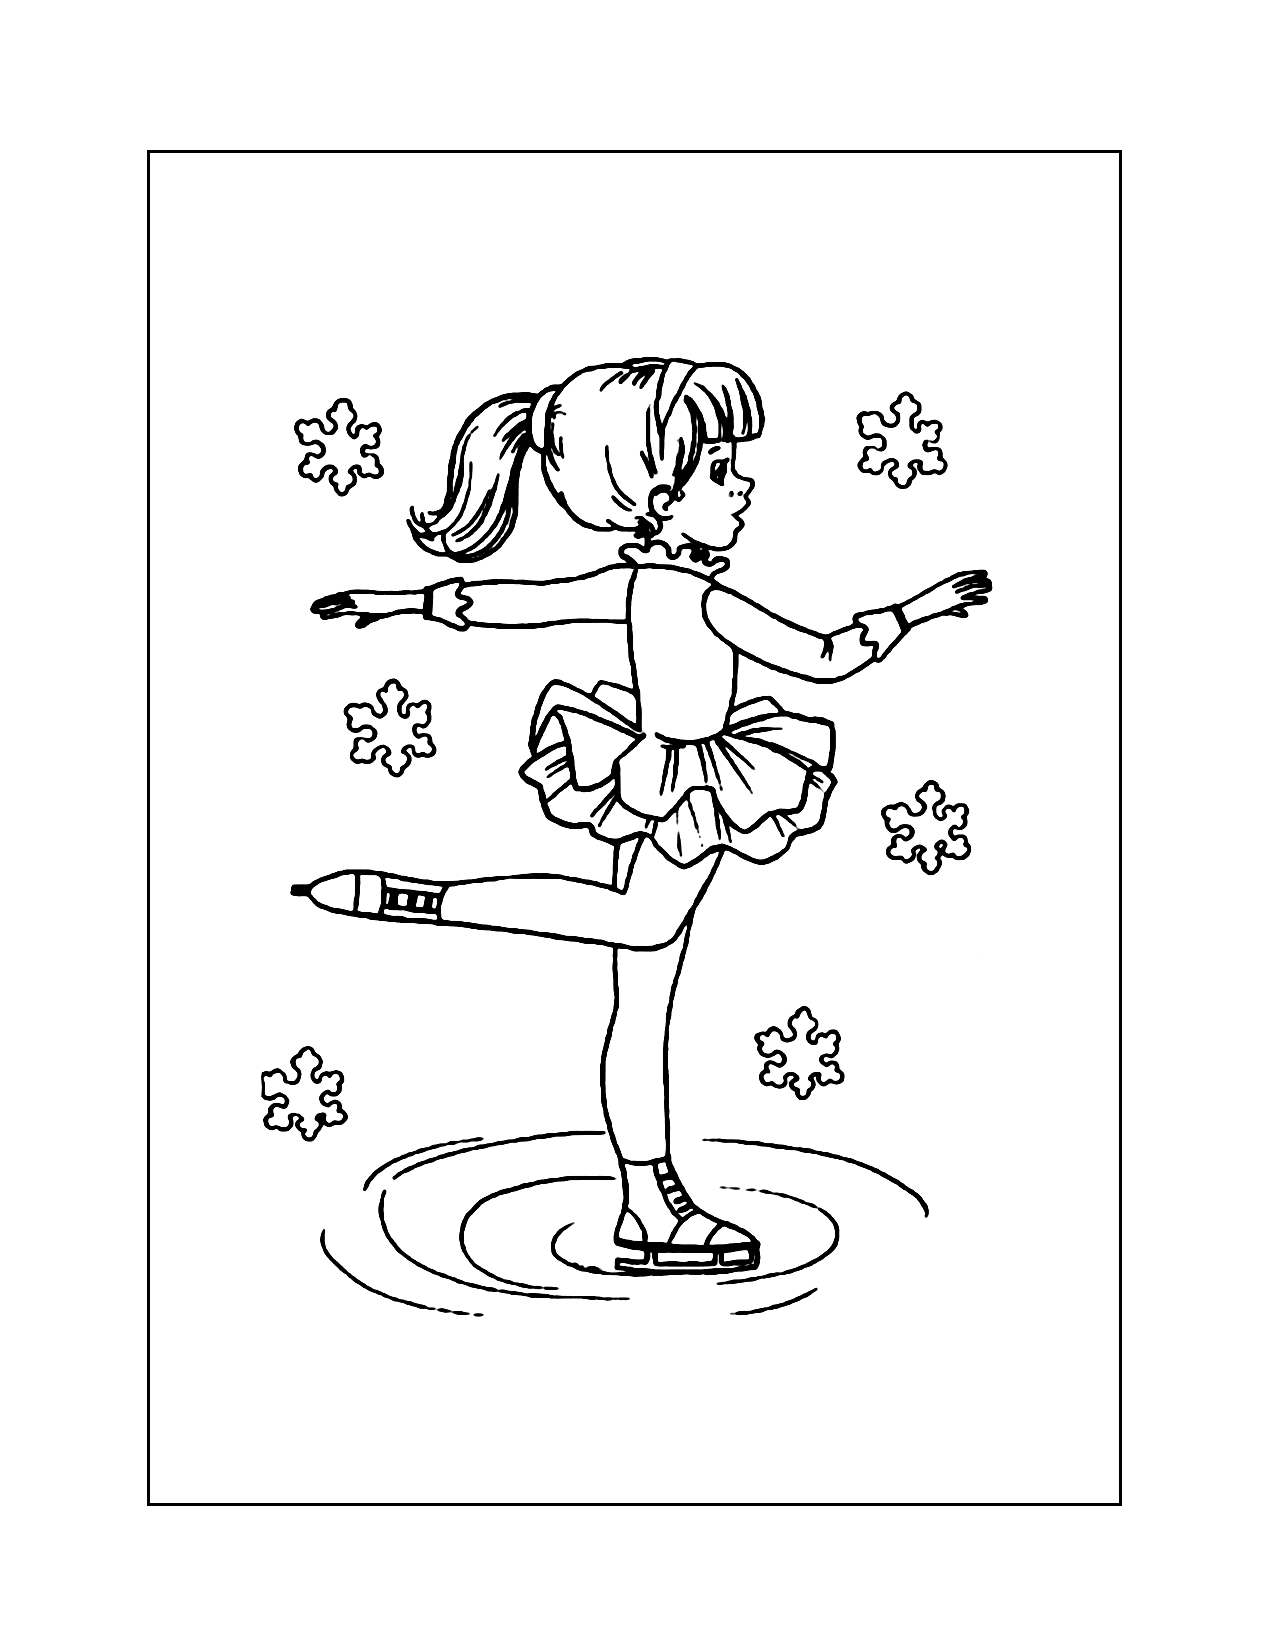 Figure Skating Attitude Spin Coloring Page